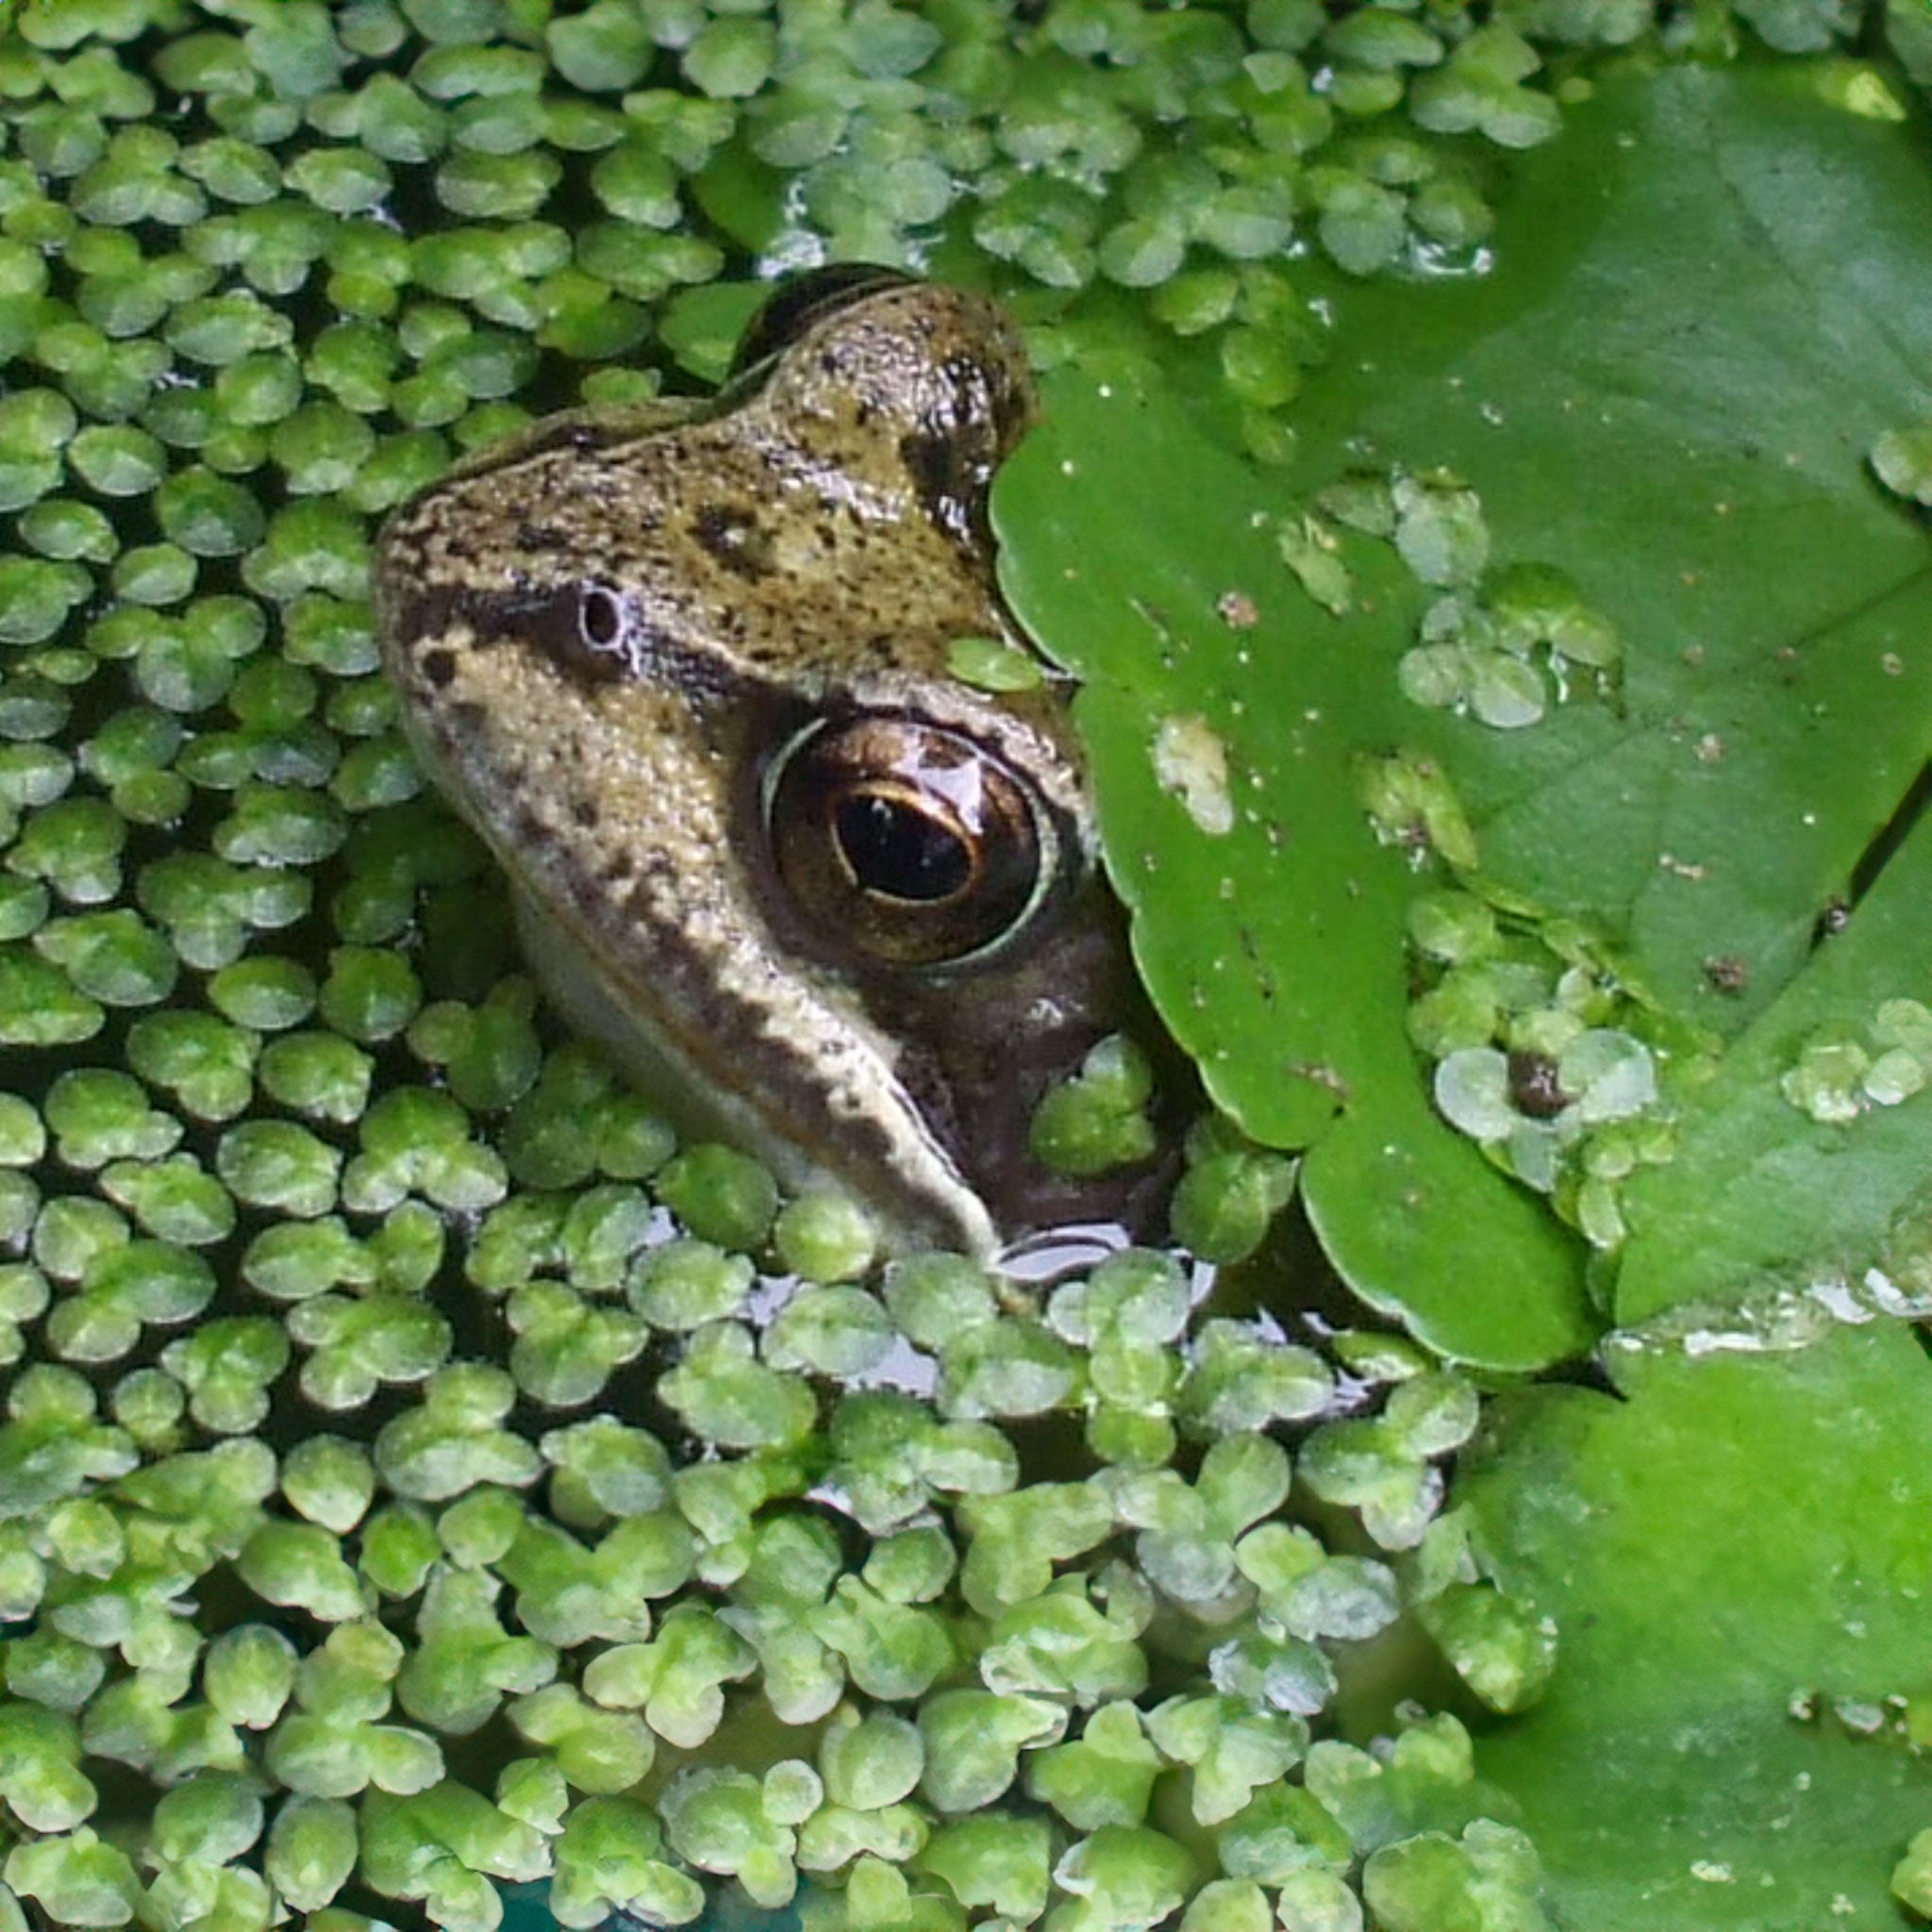 Frog poking head through duckweed in pond